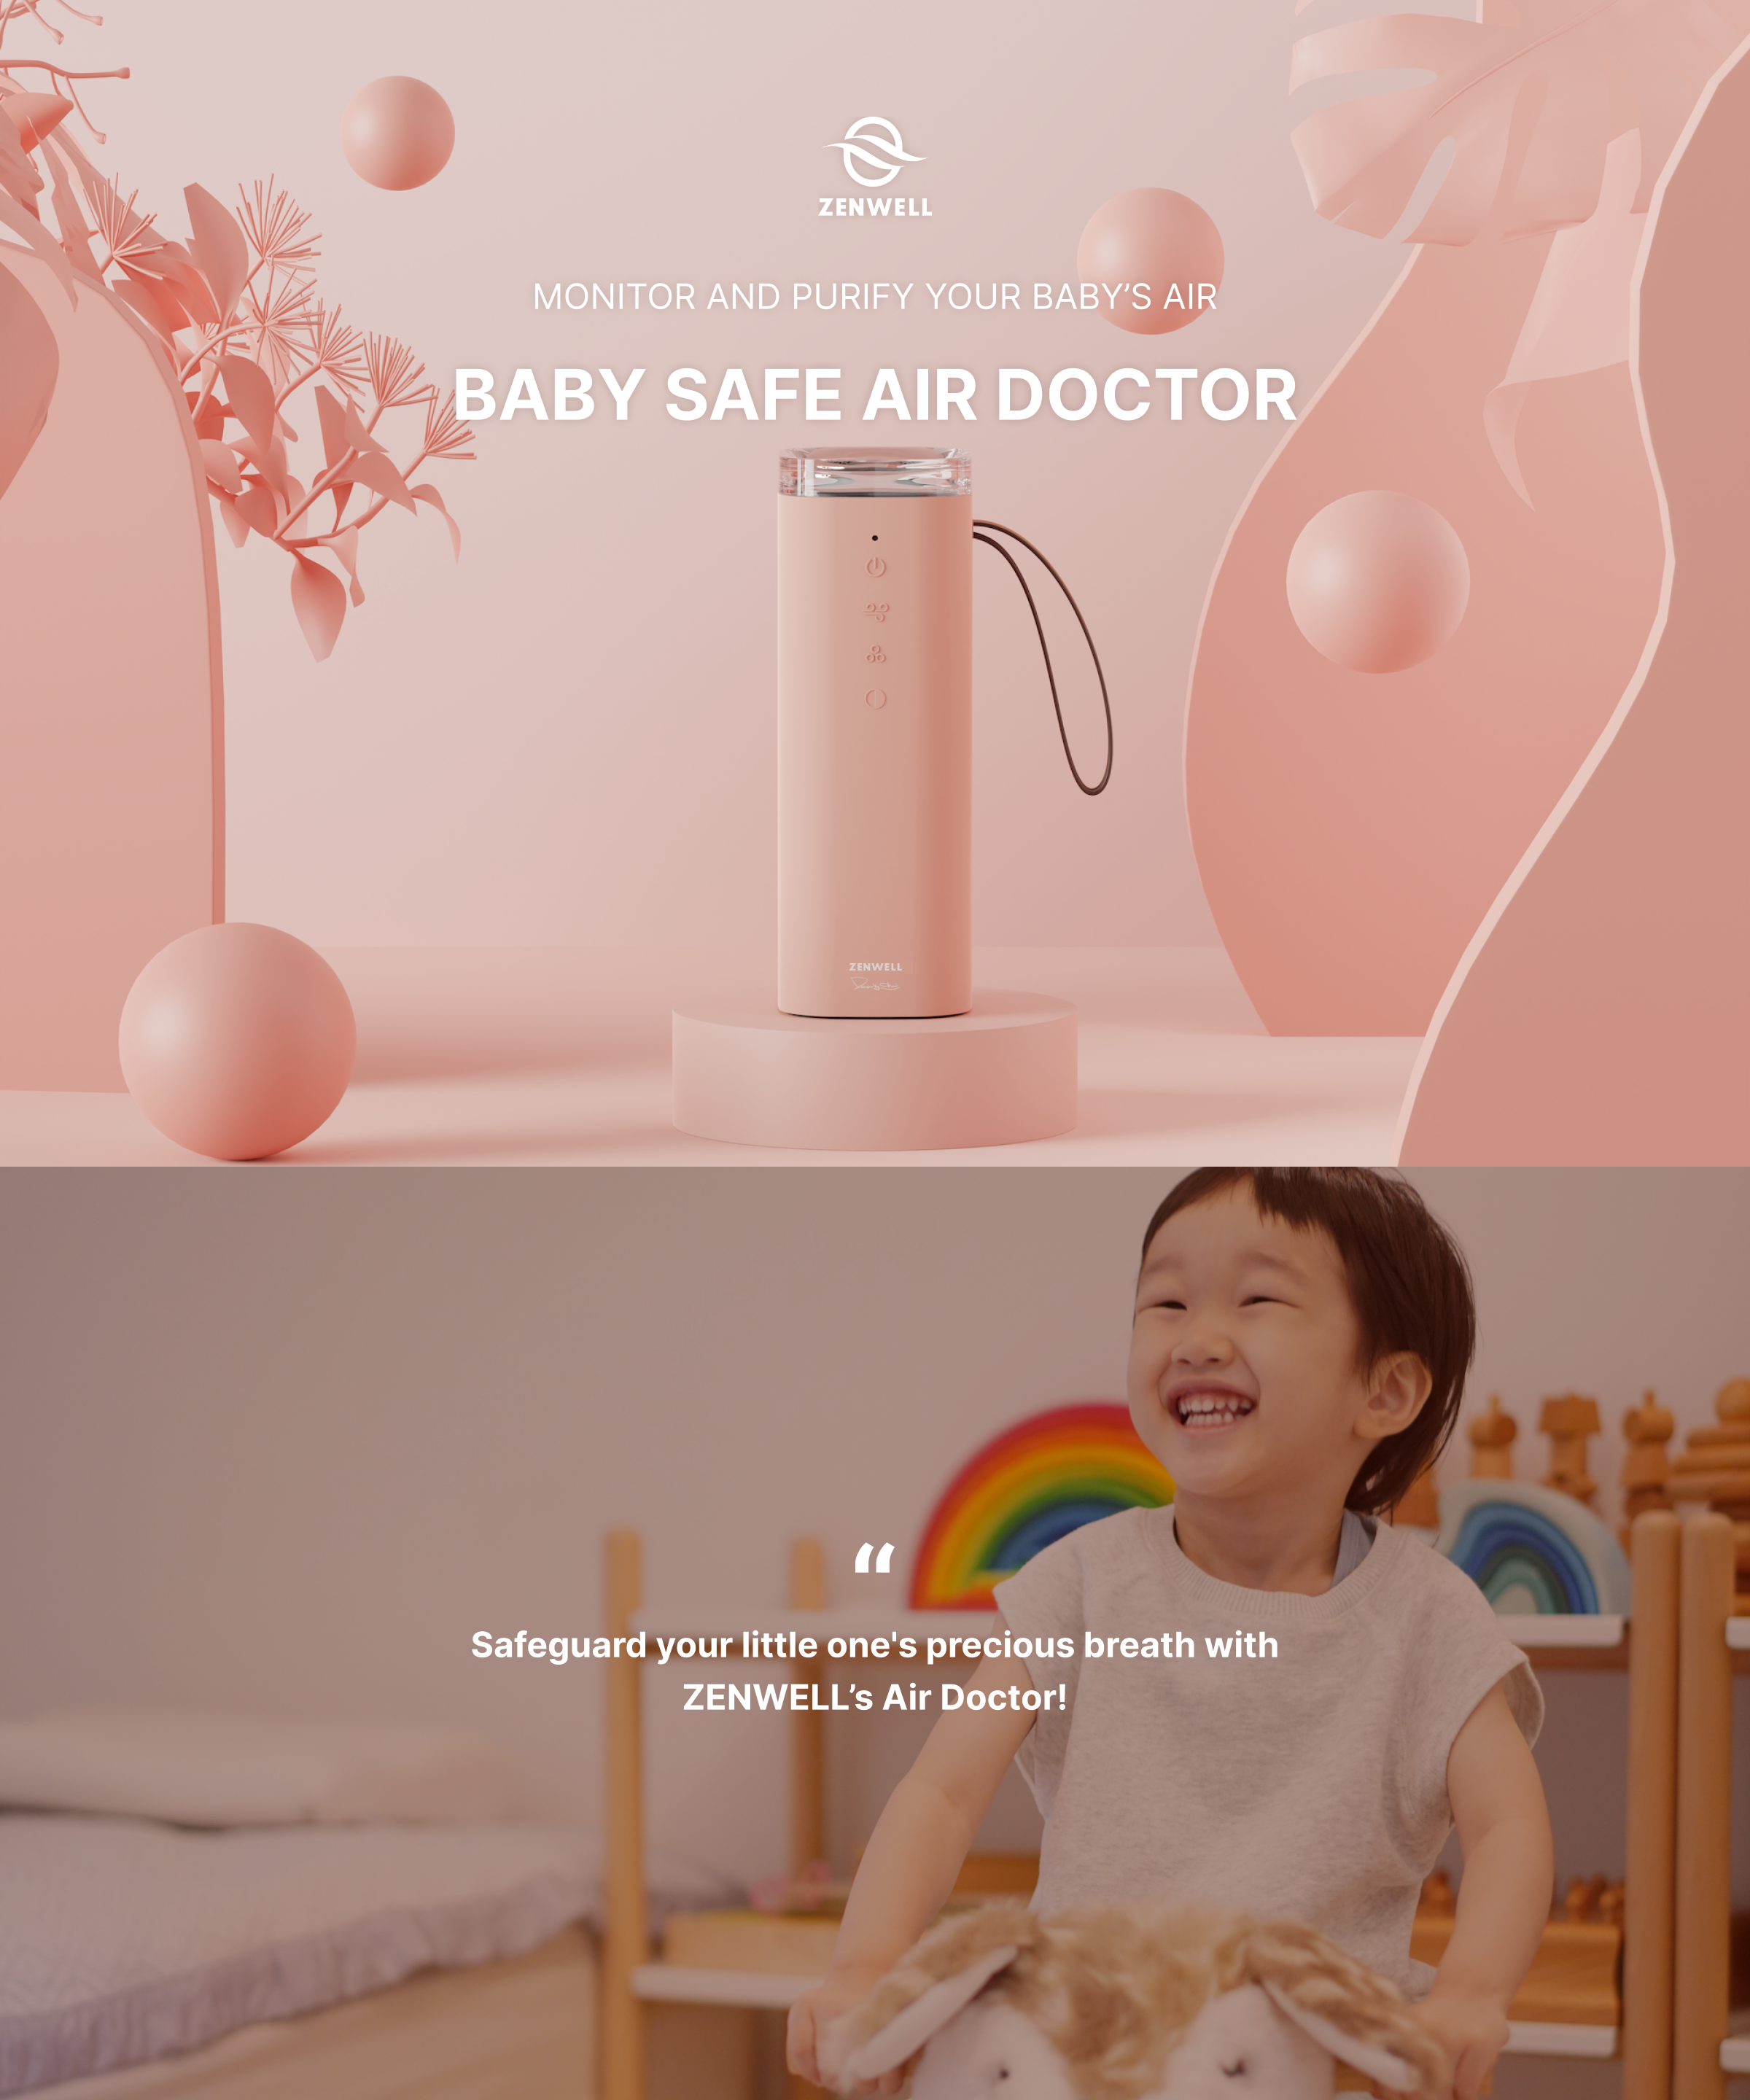 Baby Safe Air Doctor product description image saying how the product can safeguard your children's precious breath